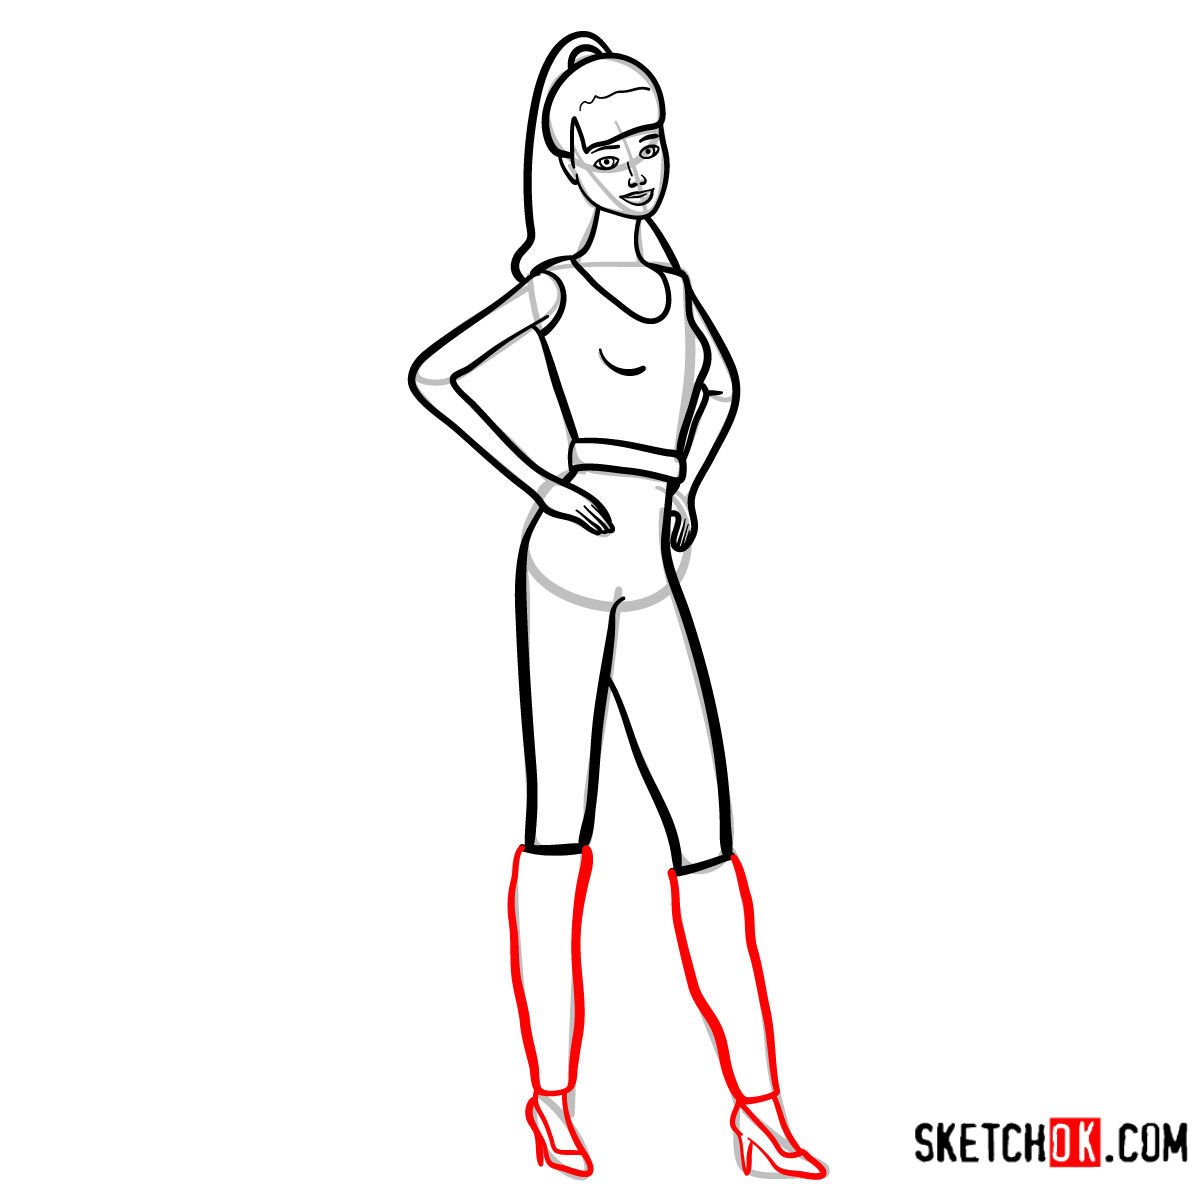 How to draw Barbie from Toy Story - step 11